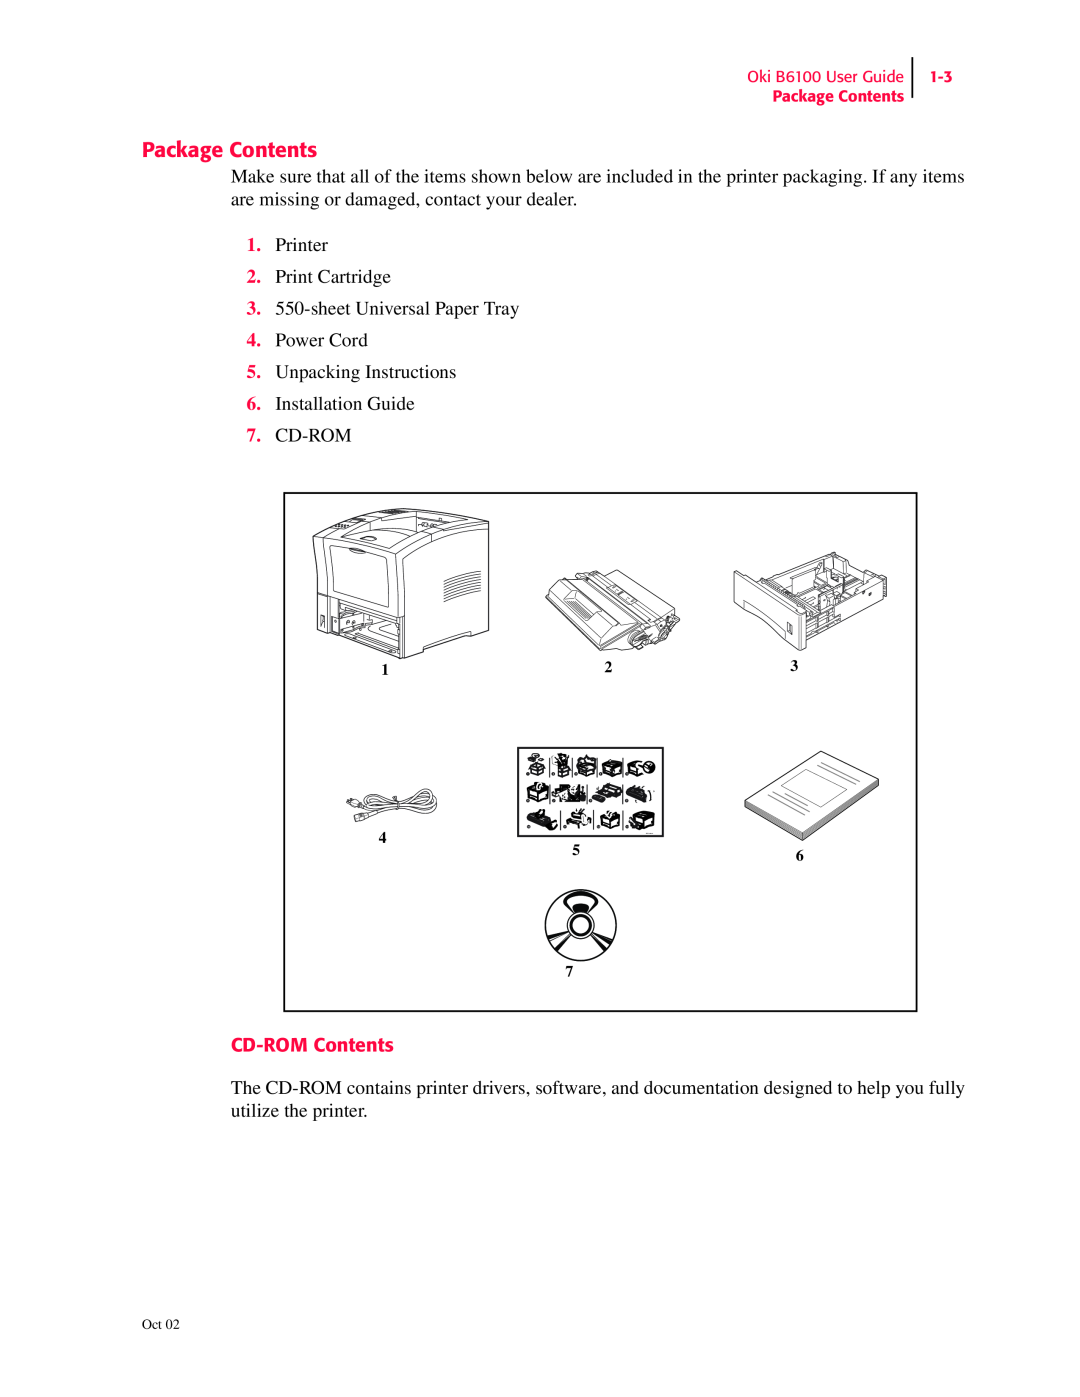 Oki 6100 manual Package Contents, CD-ROM Contents 